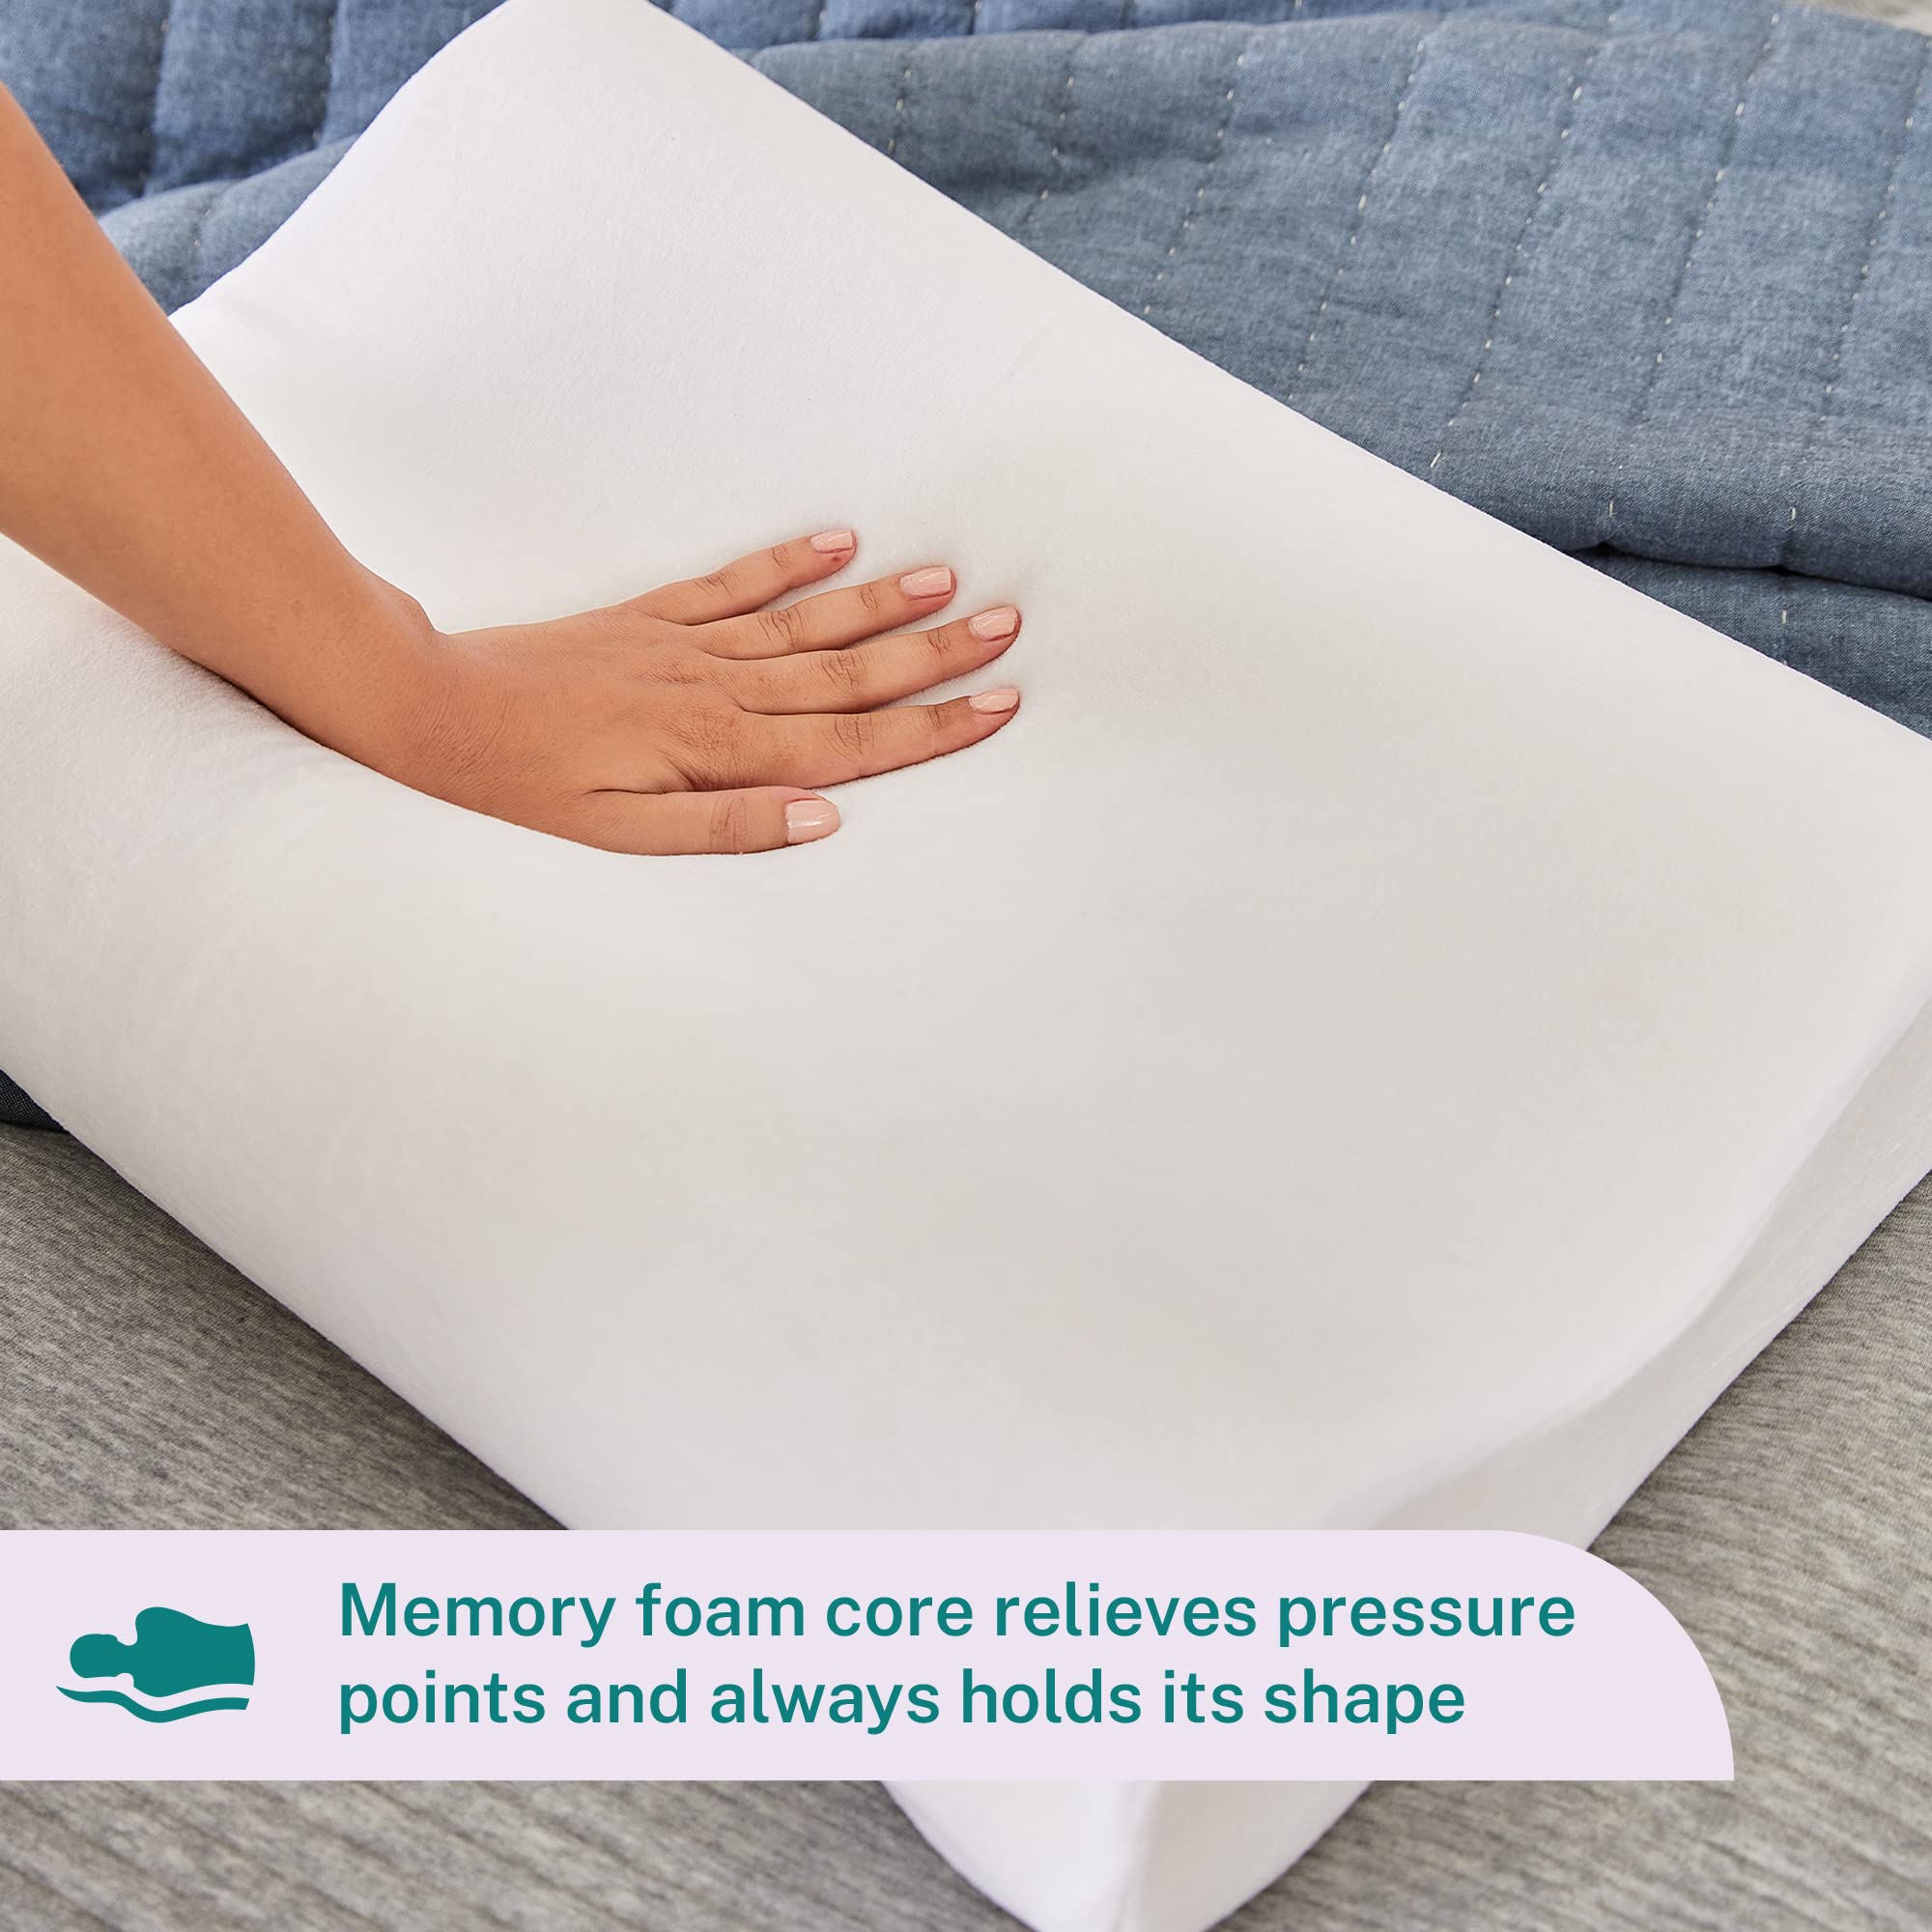 Sleep Innovations Memory Foam Contour Pillow, Standard Size, Head, Neck, and Shoulder Alignment, Side and Back Sleepers, Medium Support